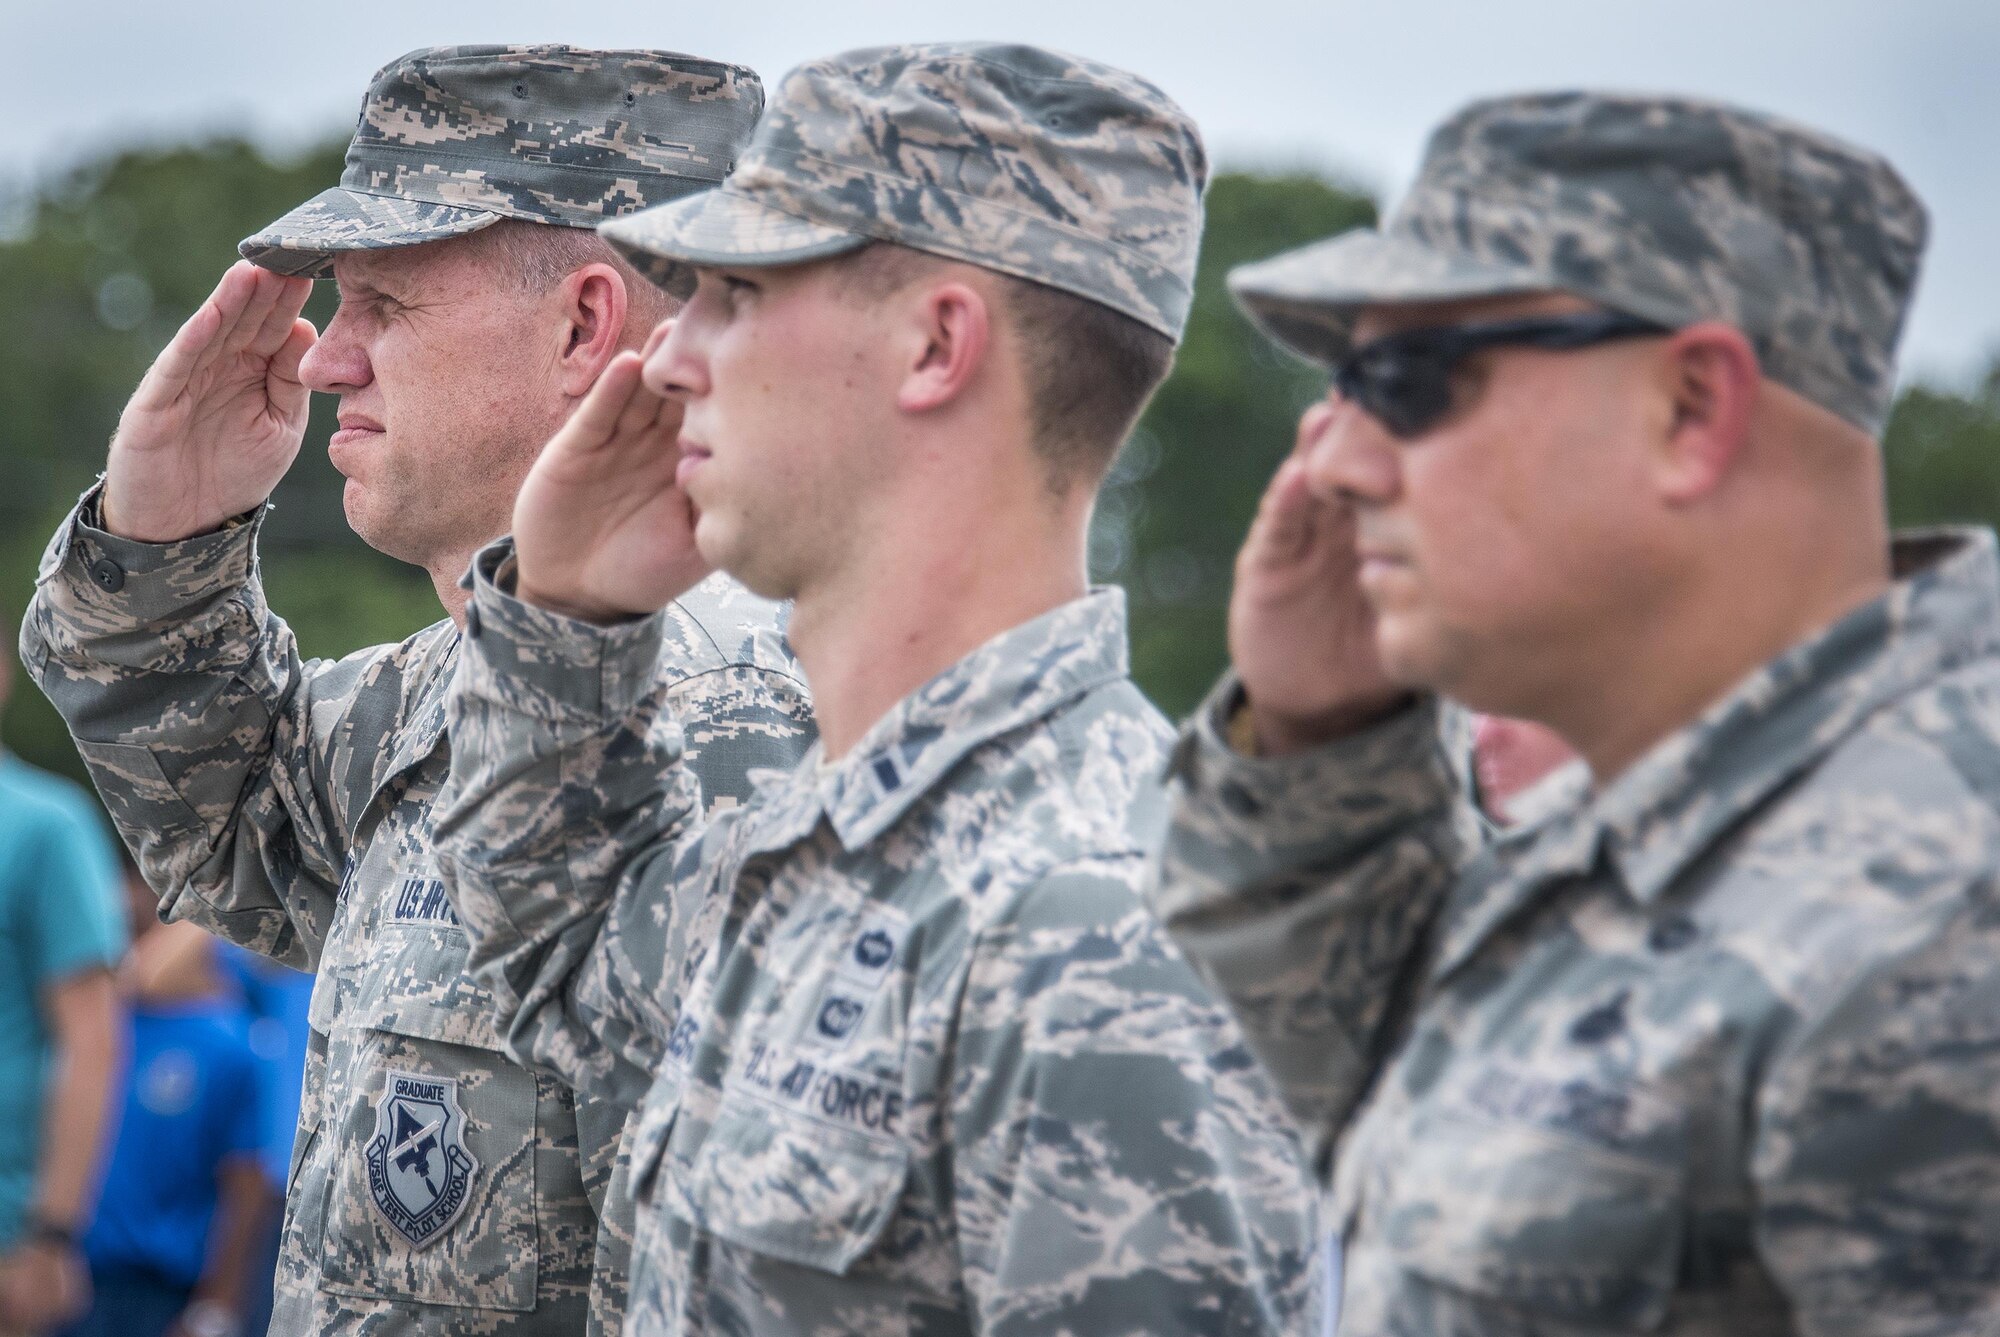 Brig. Gen. Evan Dertien, 96th Test Wing commander, 1st Lt. Lucas Huddleston, Eglin Connects coordinator, and Chief Master Sgt. Zaki Mazid, 96th TW command chief, salute during the national Anthem at the Eglin Connects event at Eglin Air Force Base, Fla., June 2.  The event to help promote resiliency featured information booths, sporting events and a car show.  (U.S. Air Force photo/Samuel King Jr.)